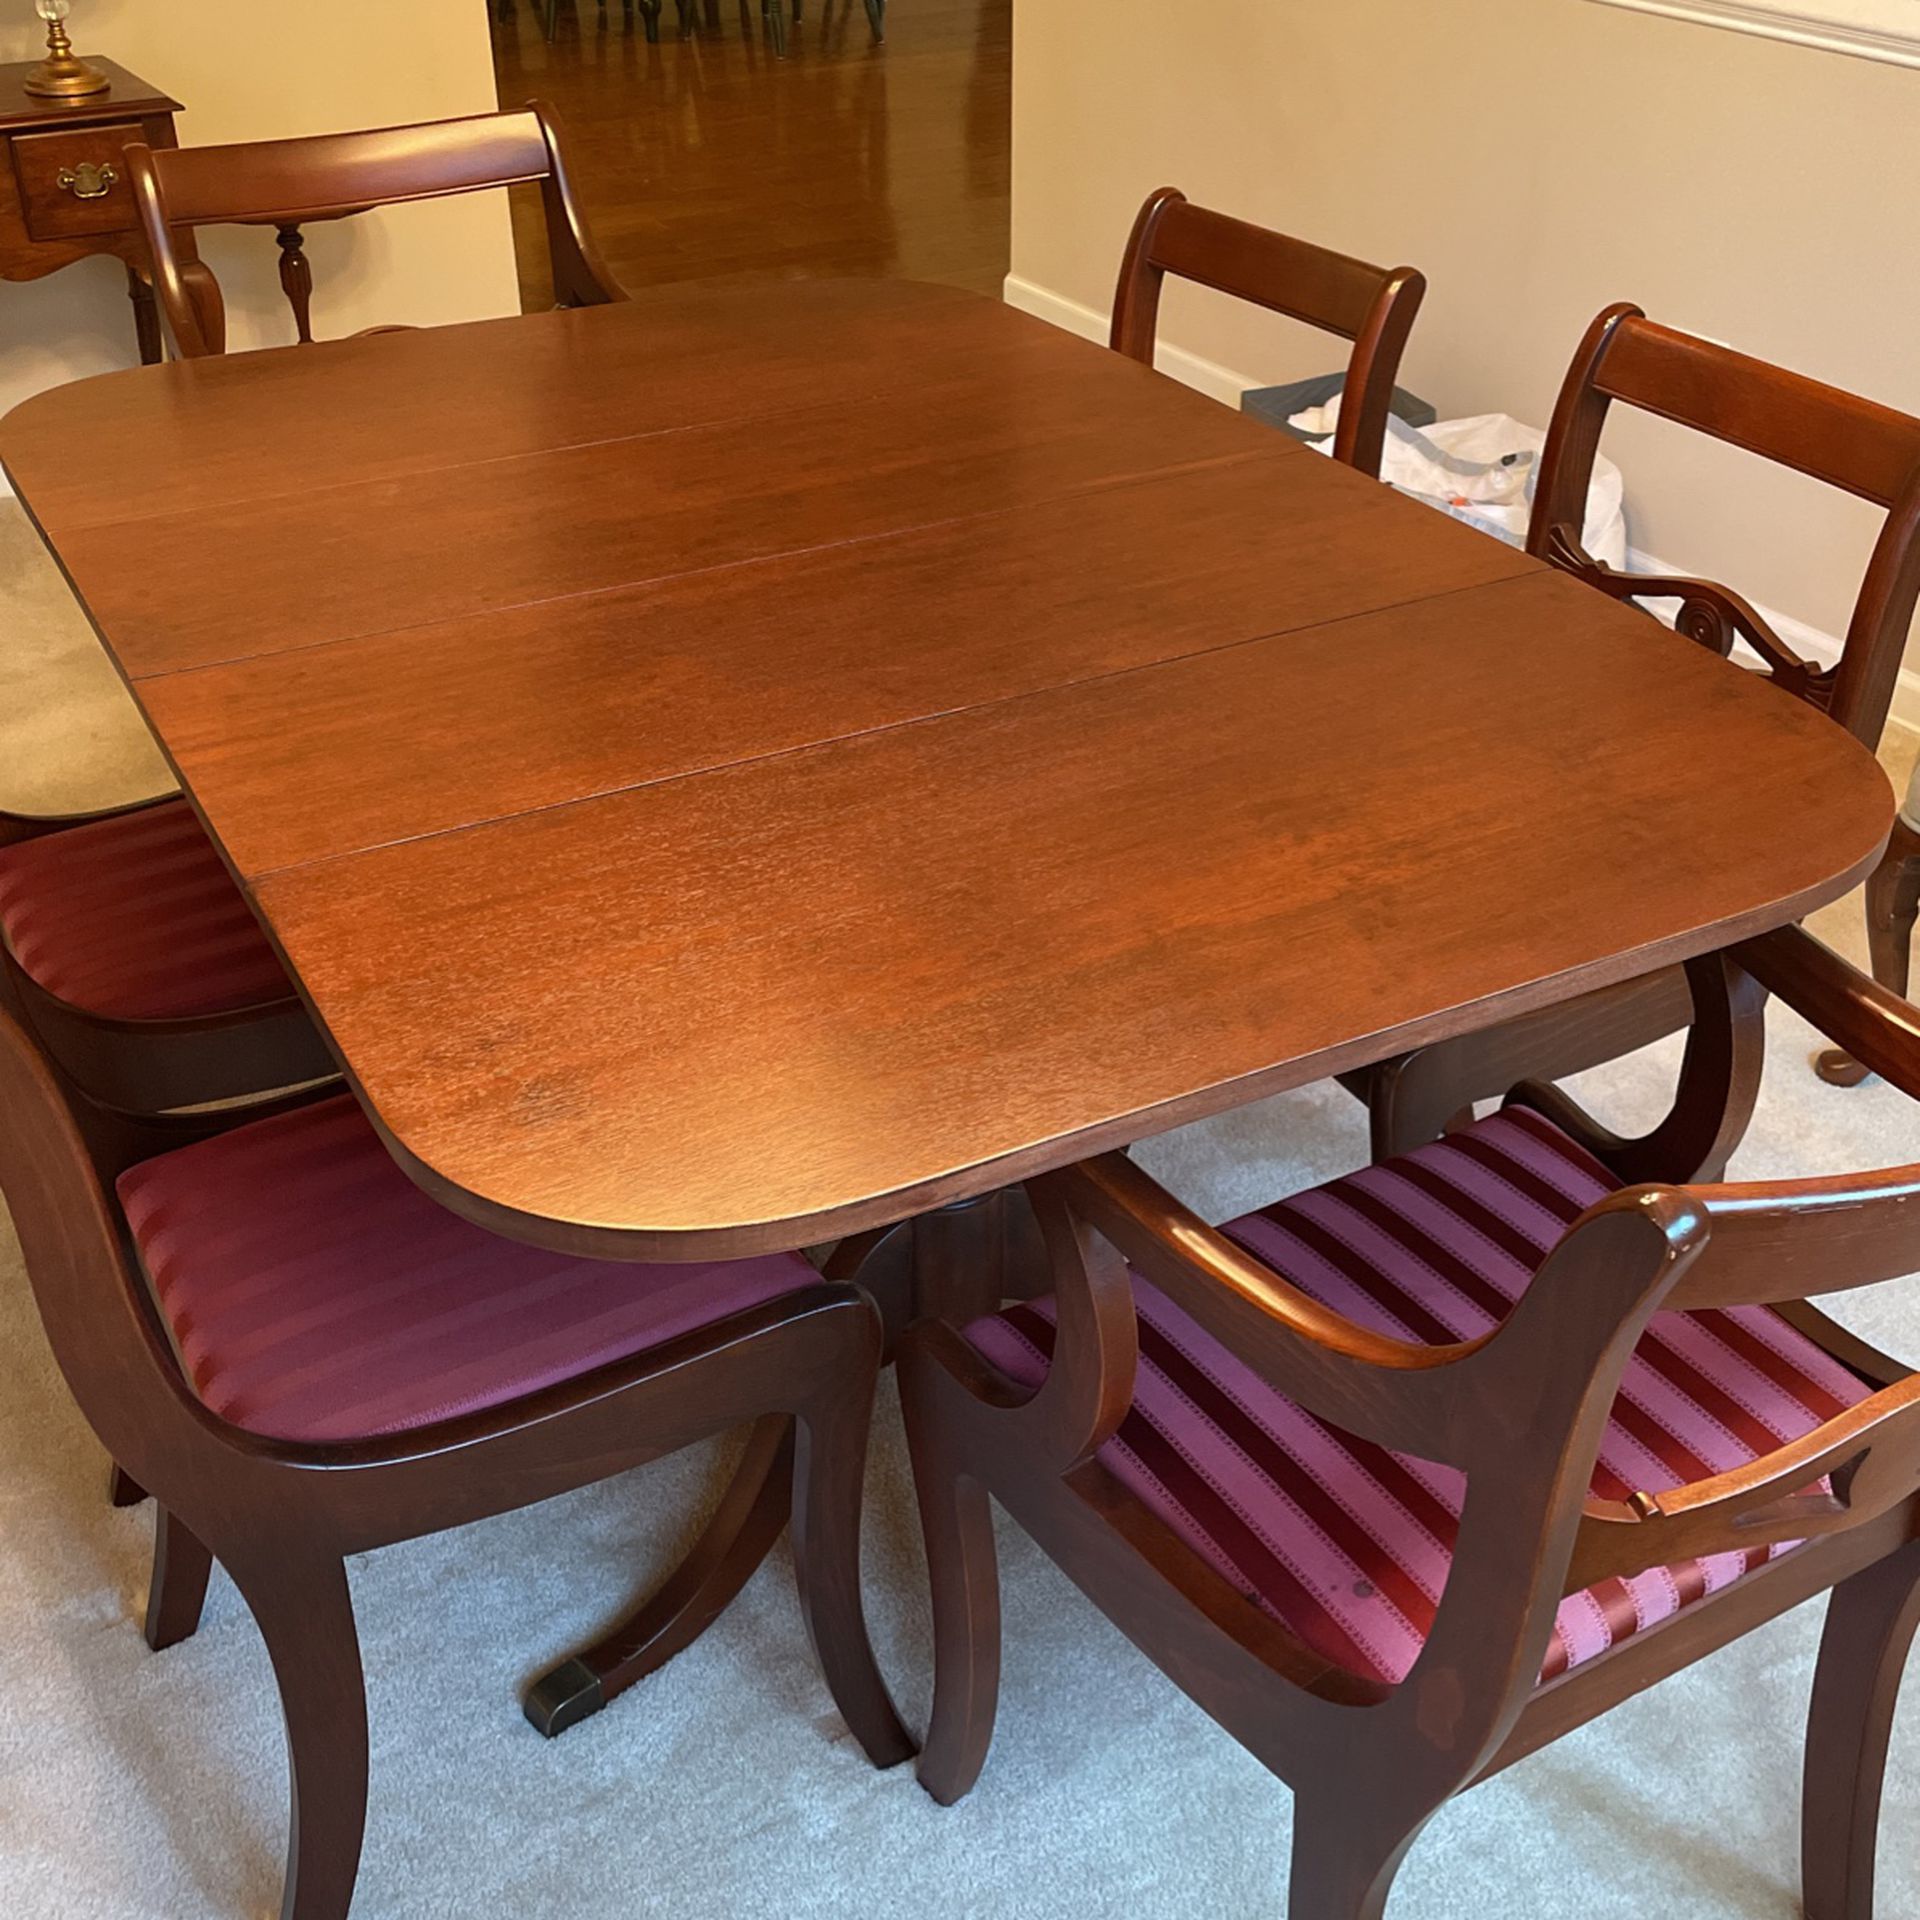 Antique Dining Room Table And Chairs